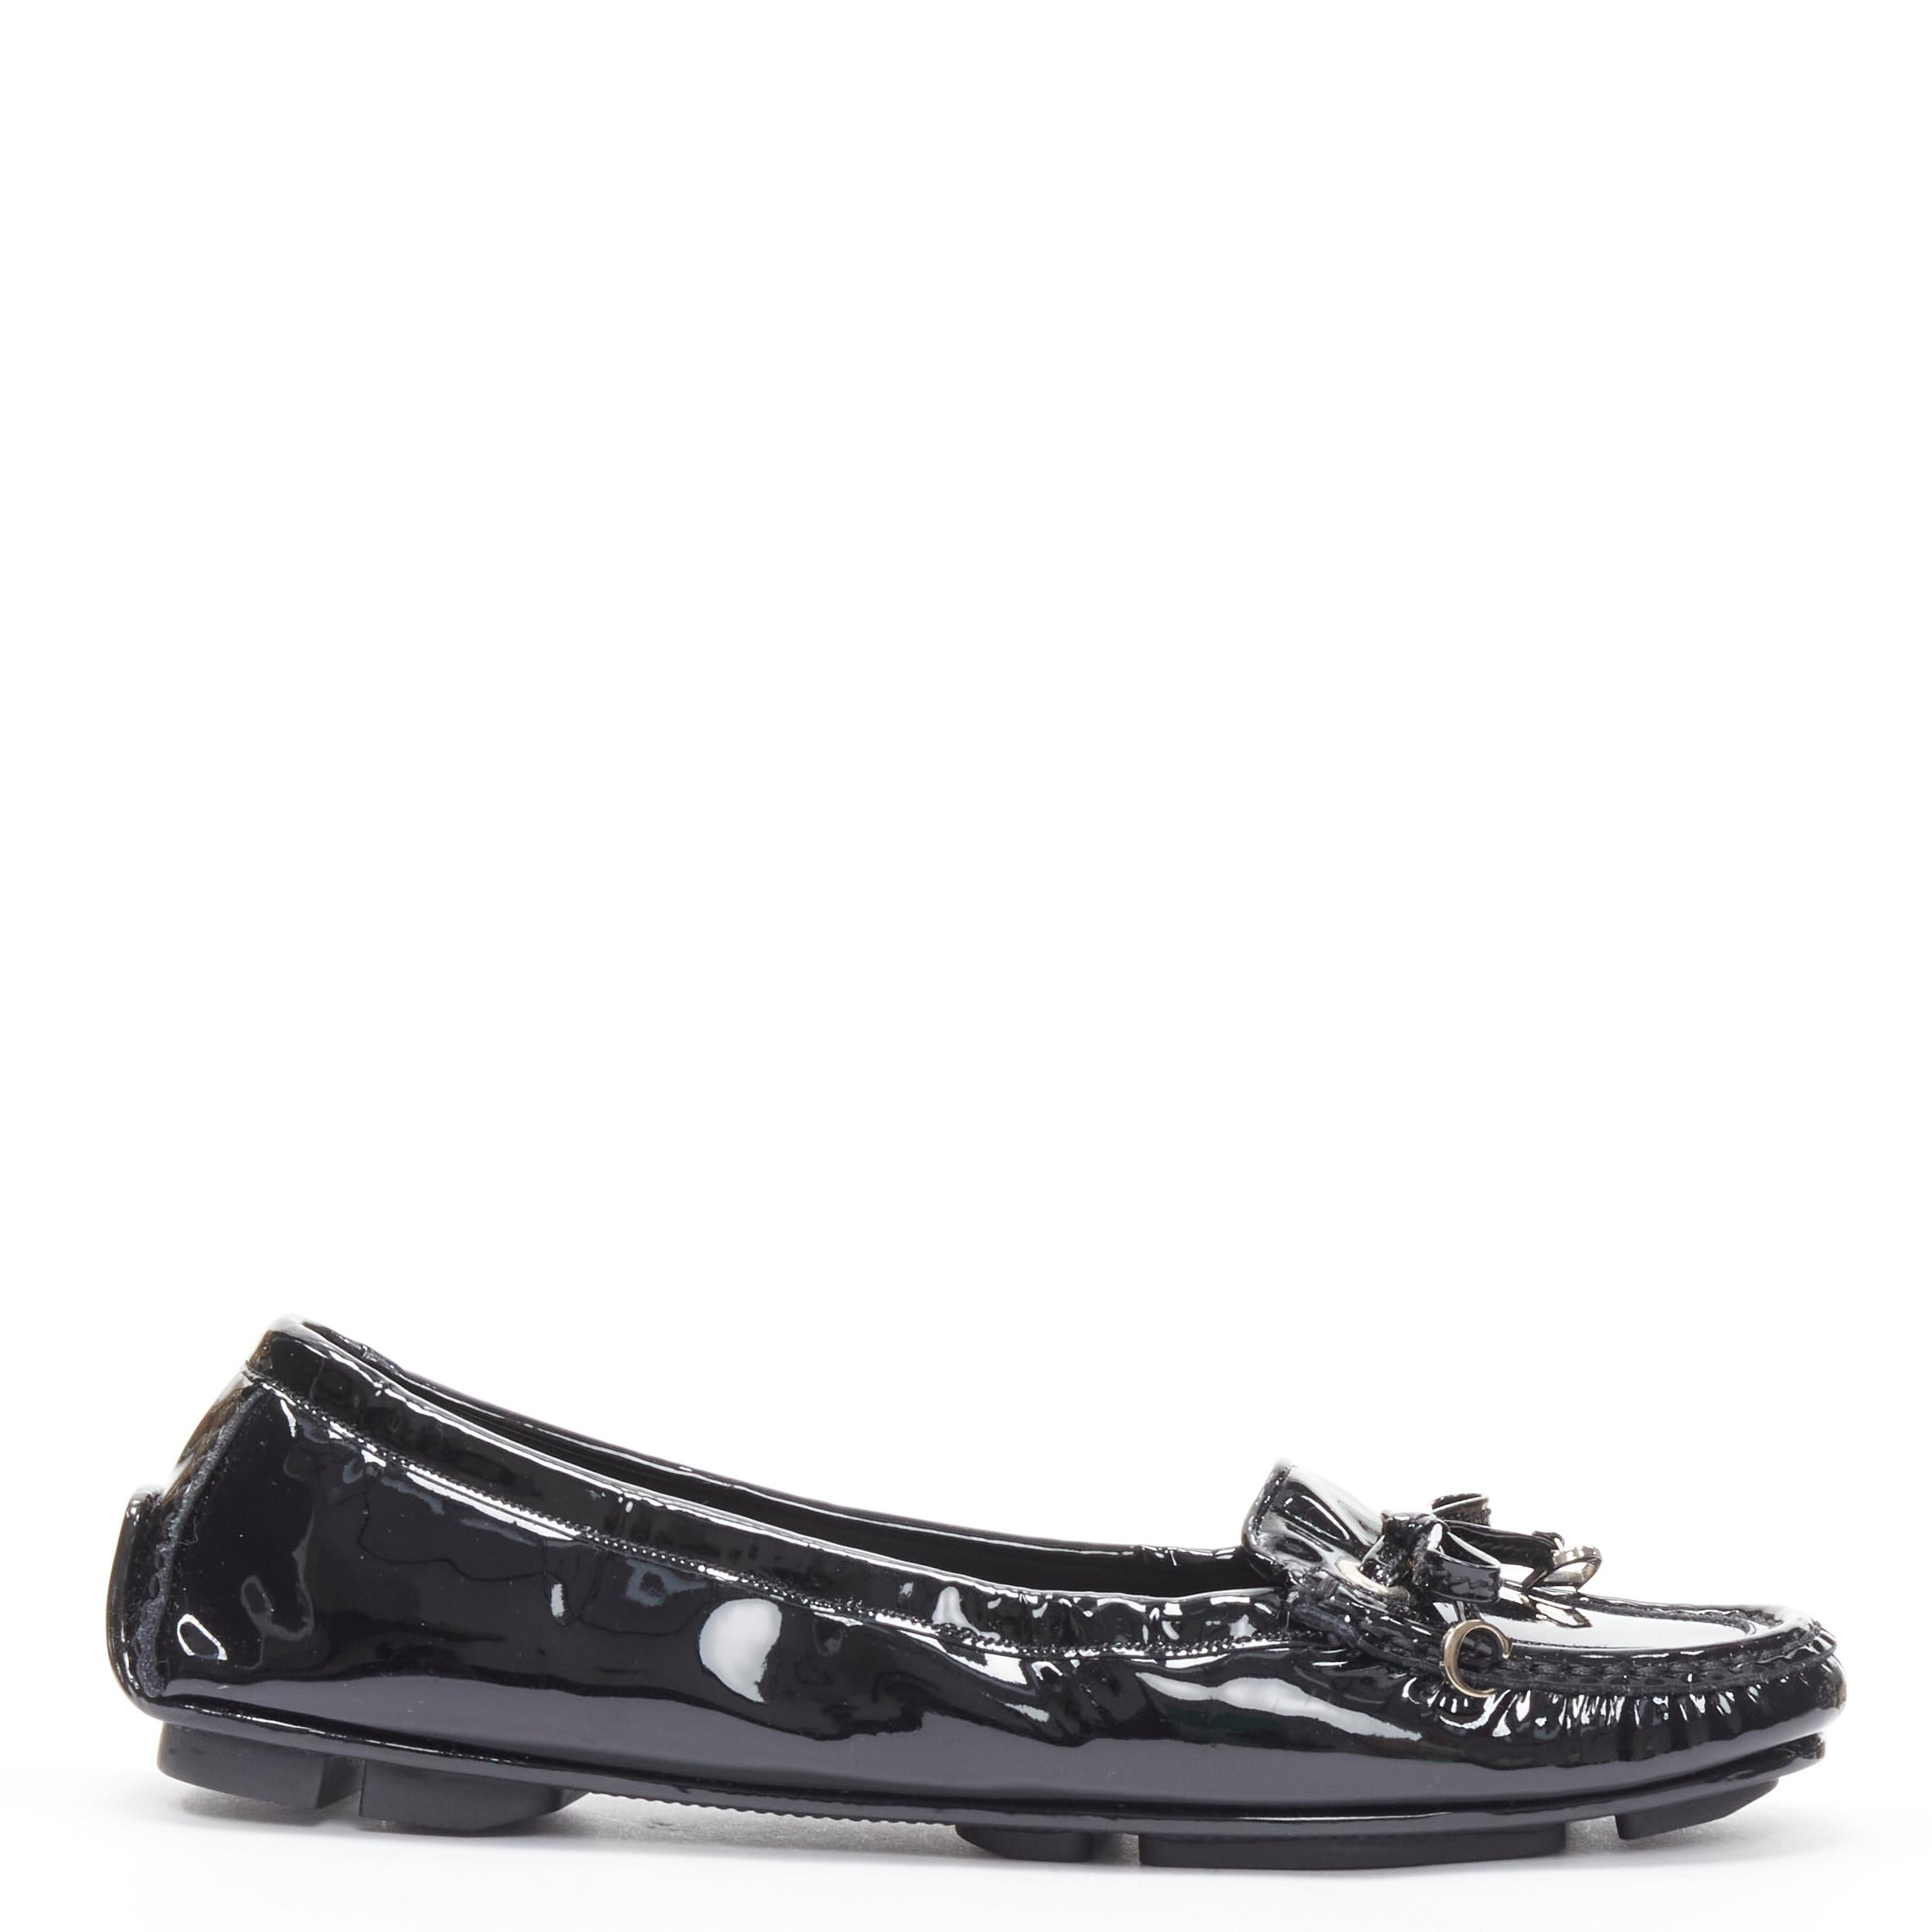 CHRISTIAN DIOR black patent silver CD charm bow flat loafer EU37 
Reference: CELG/A00227 
Brand: Christian Dior 
Material: Patent Leather 
Color: Black 
Pattern: Solid 
Made in: Italy 

CONDITION: 
Condition: Excellent, this item was pre-owned and